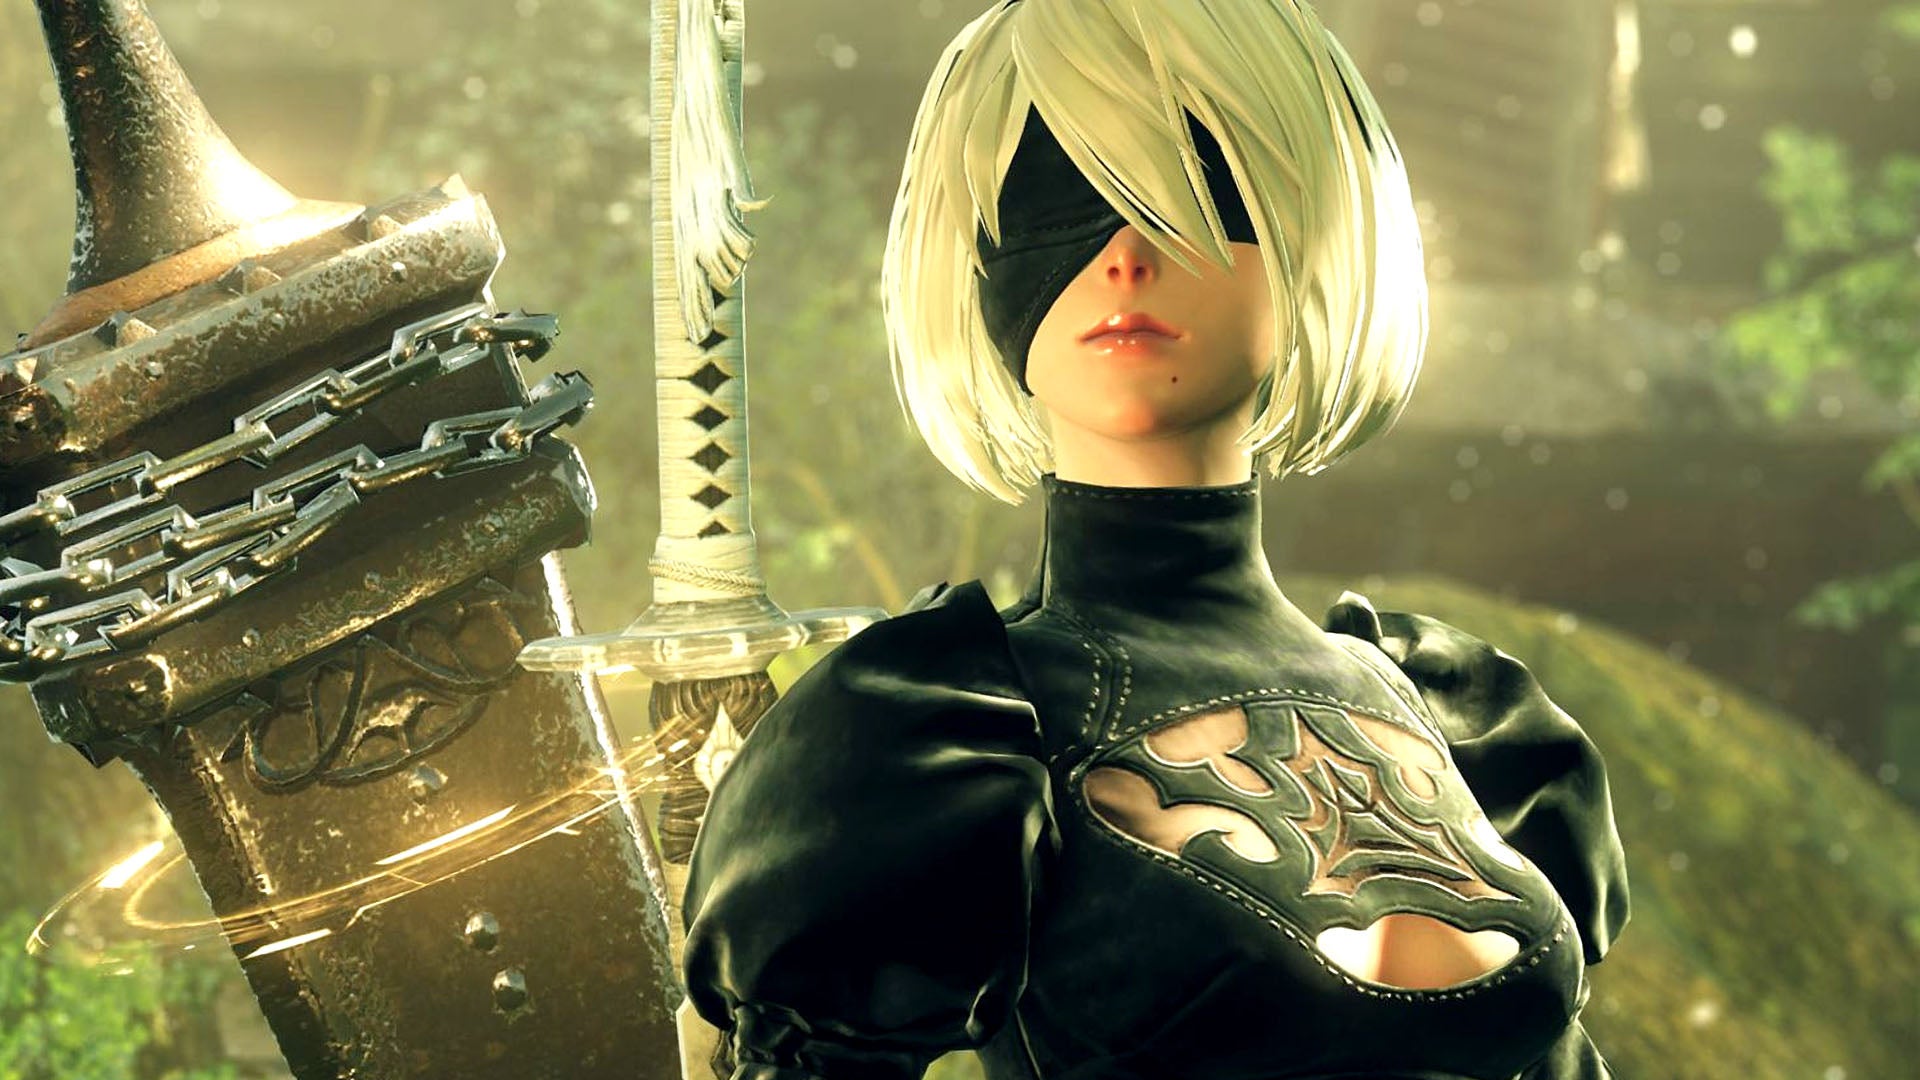 NieR Automata Game Review and Buying Guide: Discover the Pros and Cons